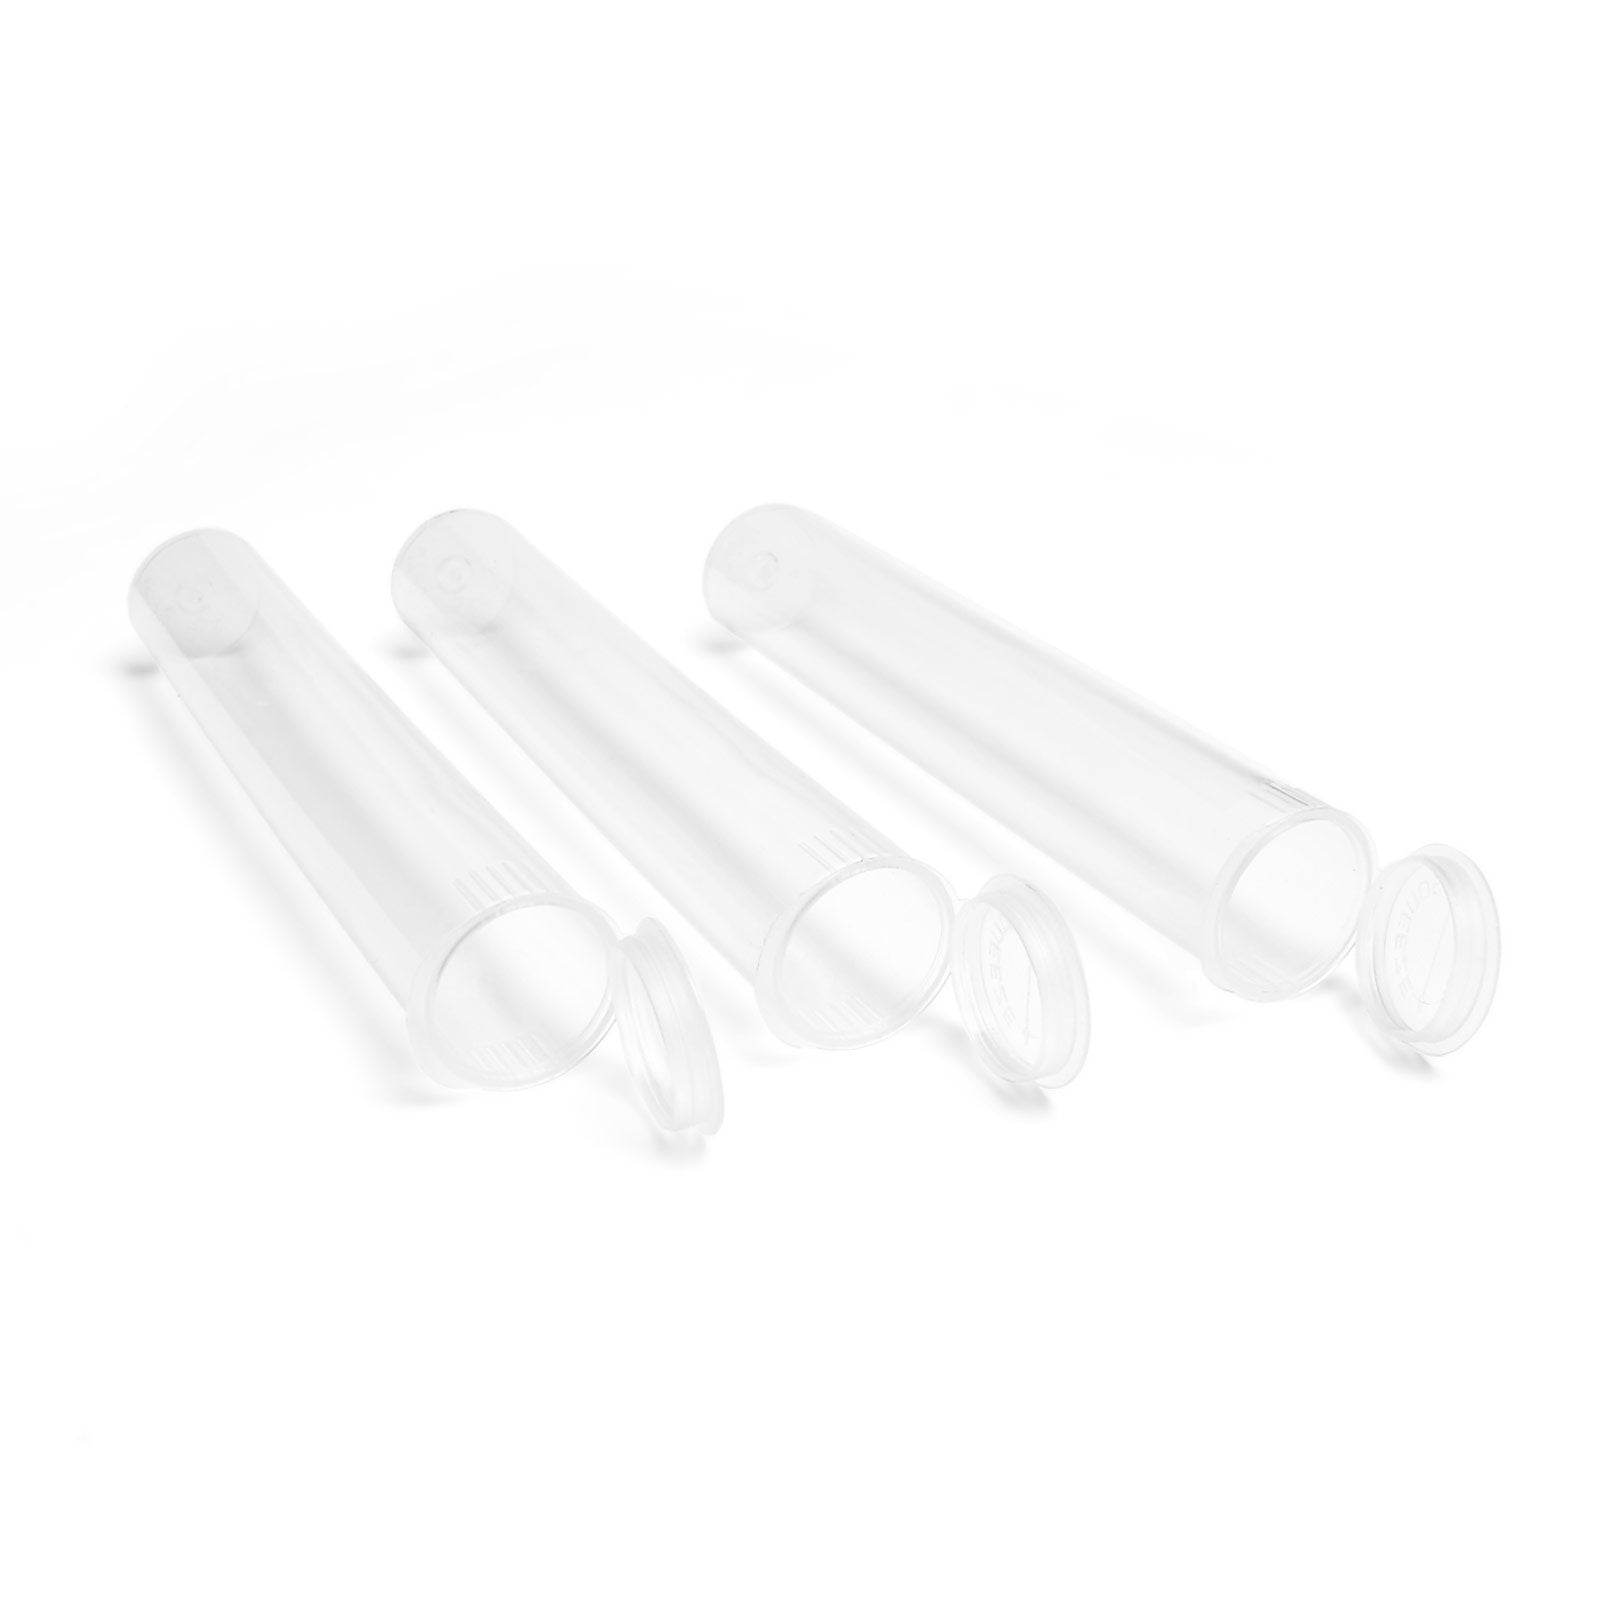 98mm Rx Squeeze Tubes Translucent Clear - 1 Count